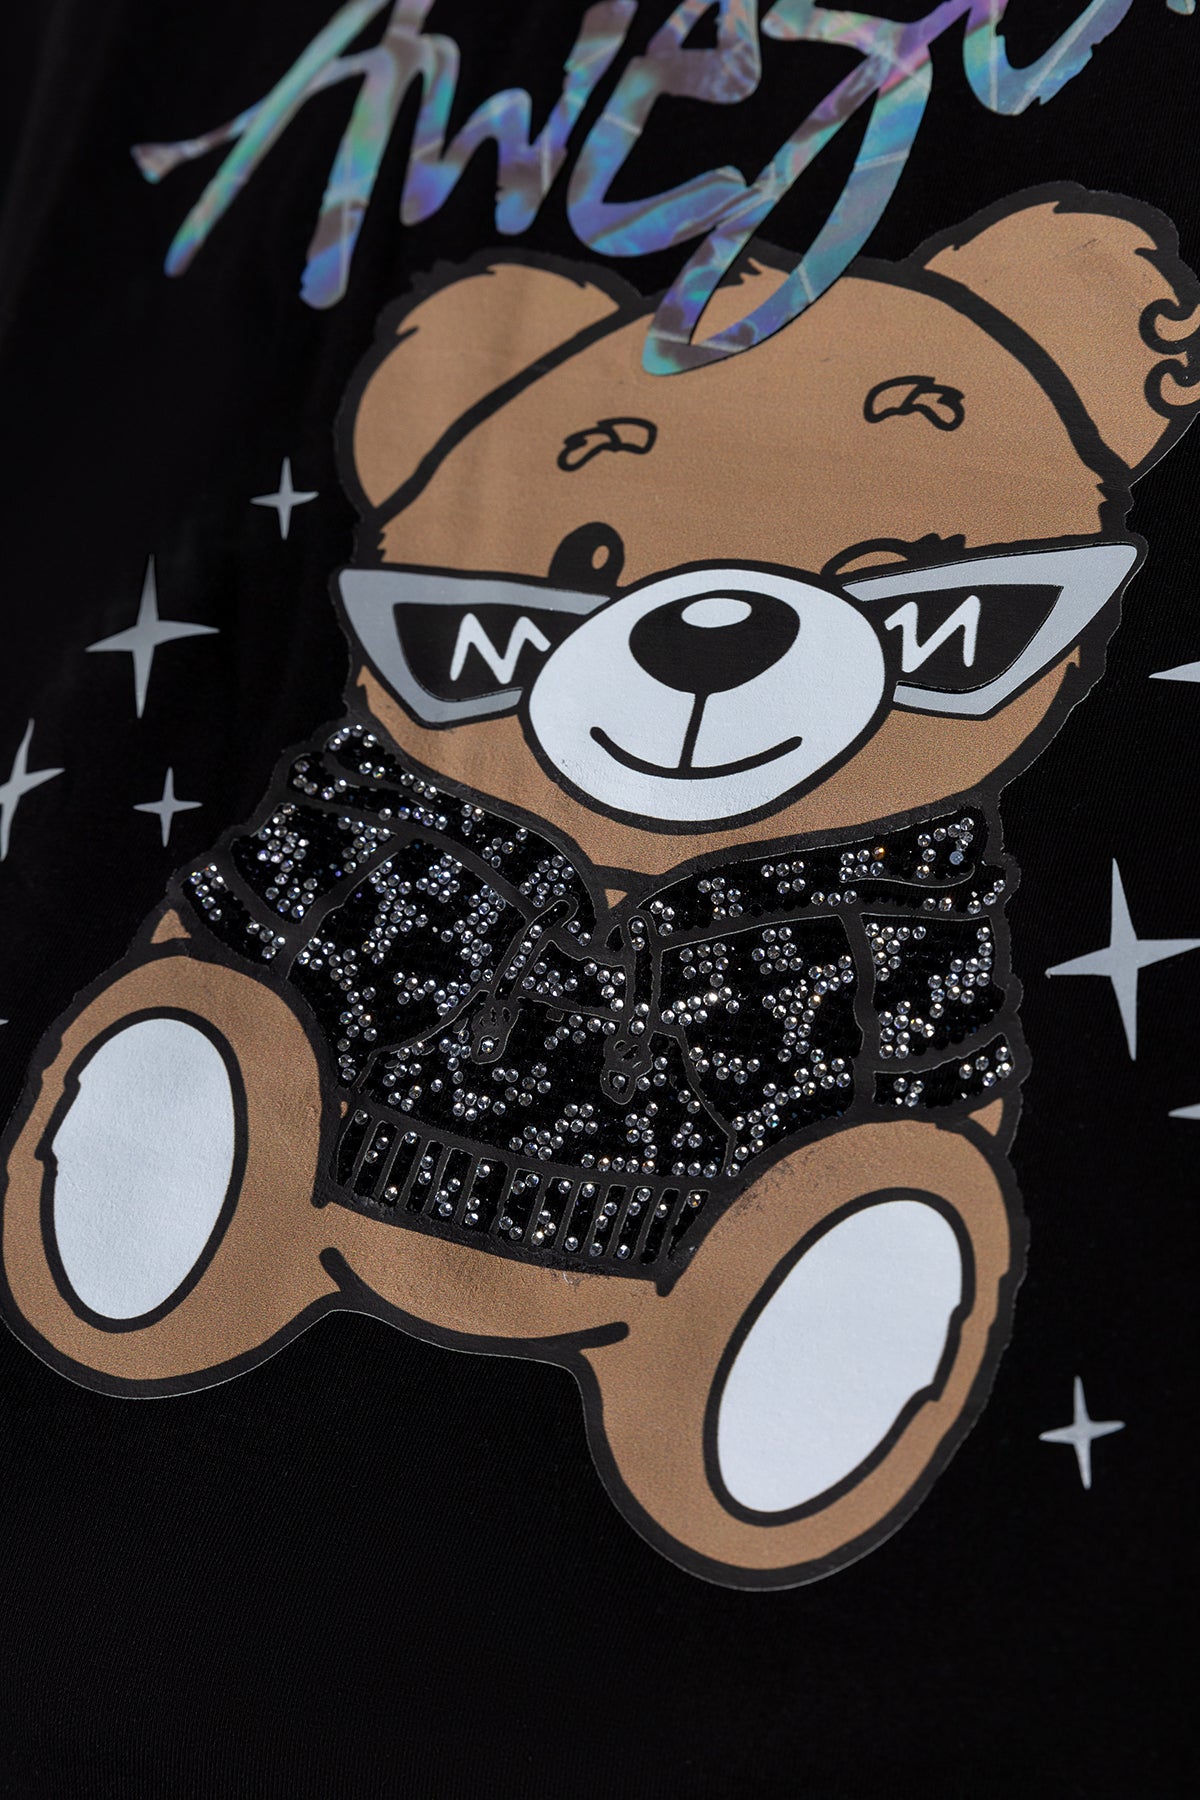 "Awesome" Teddy Bear Graphic Tee